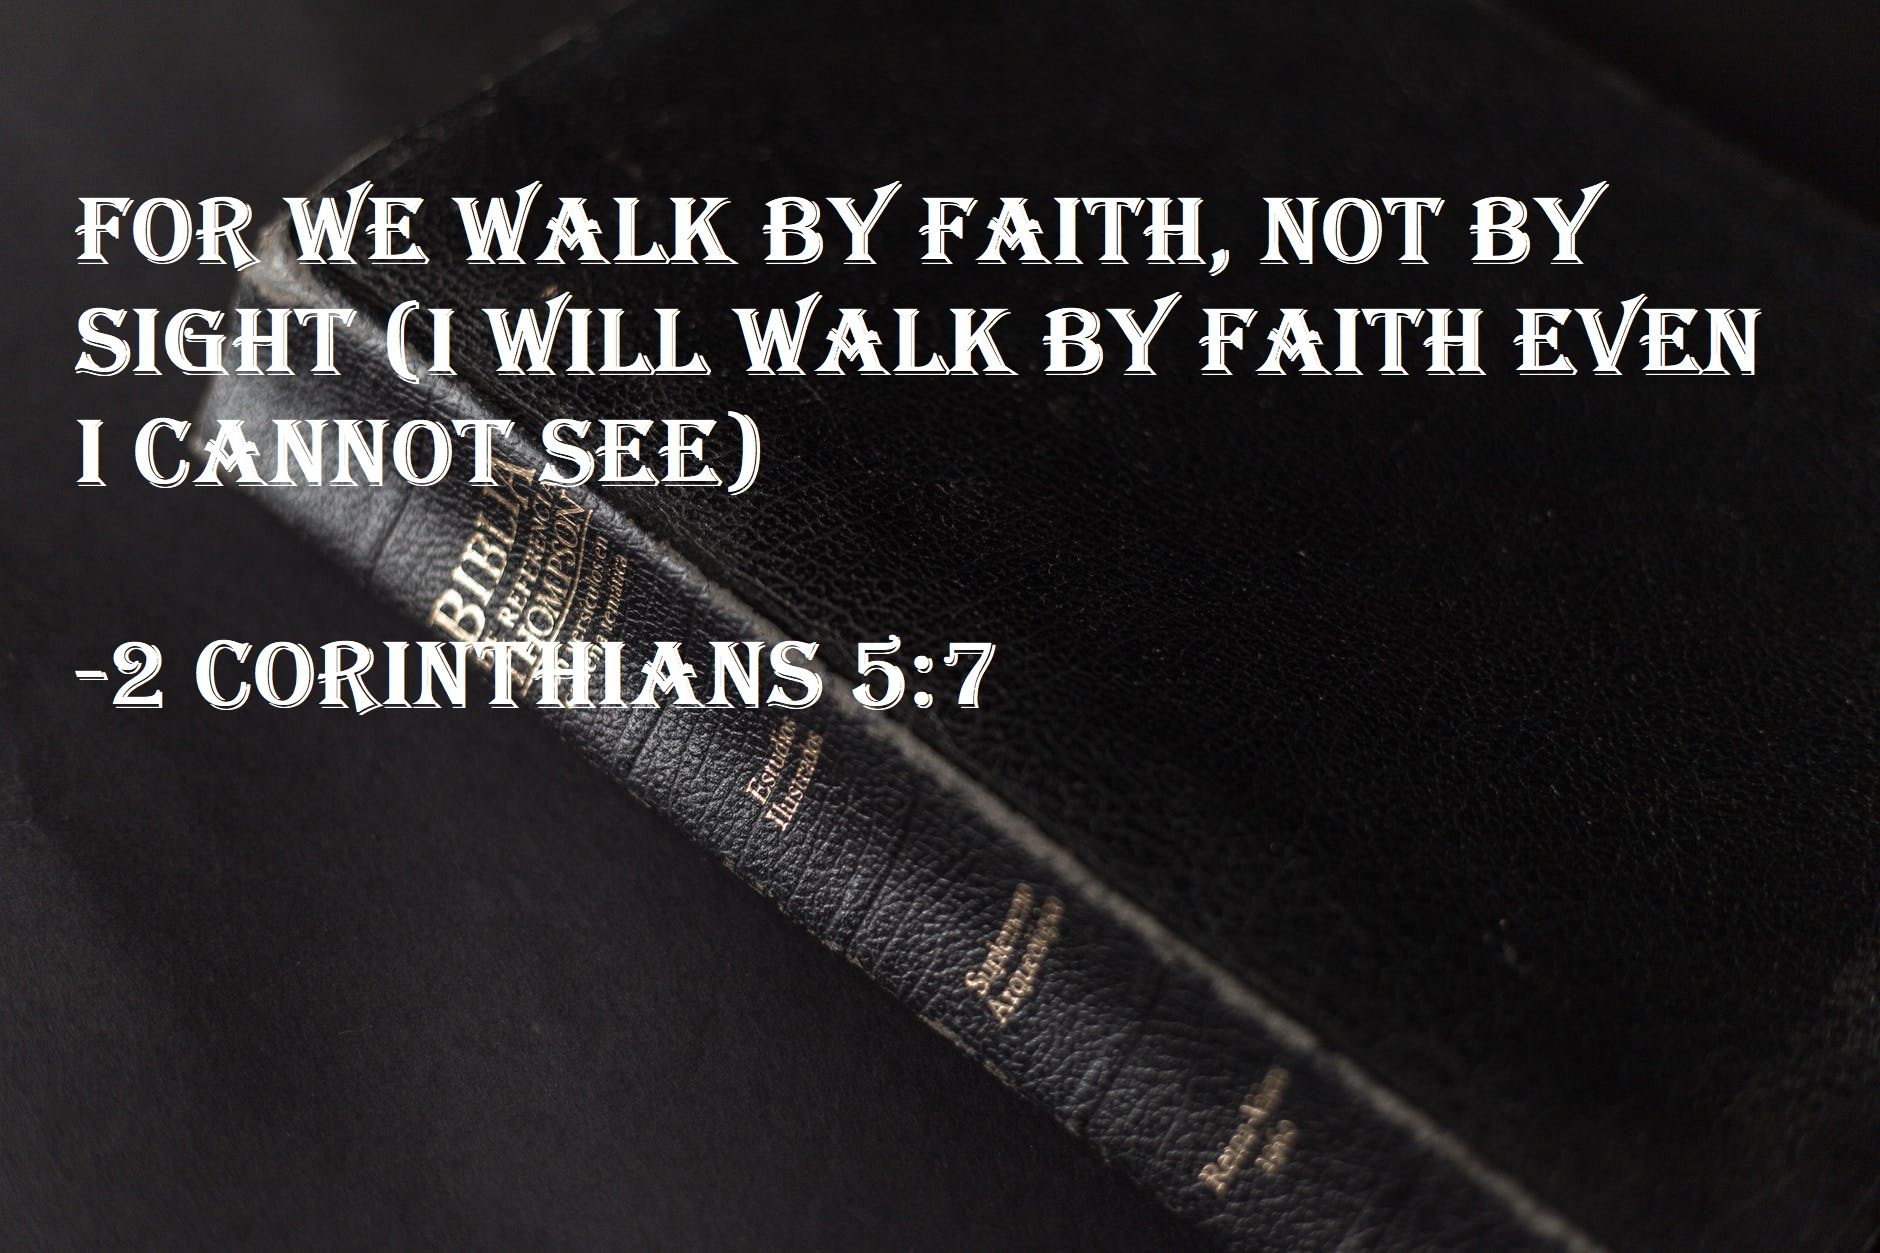 Bible%20Quote%20meaning%2C%202%20Corinthians%205%3A7%20-%20I%20will%20walk%20by%20faith%20even%20I%20cannot%20see